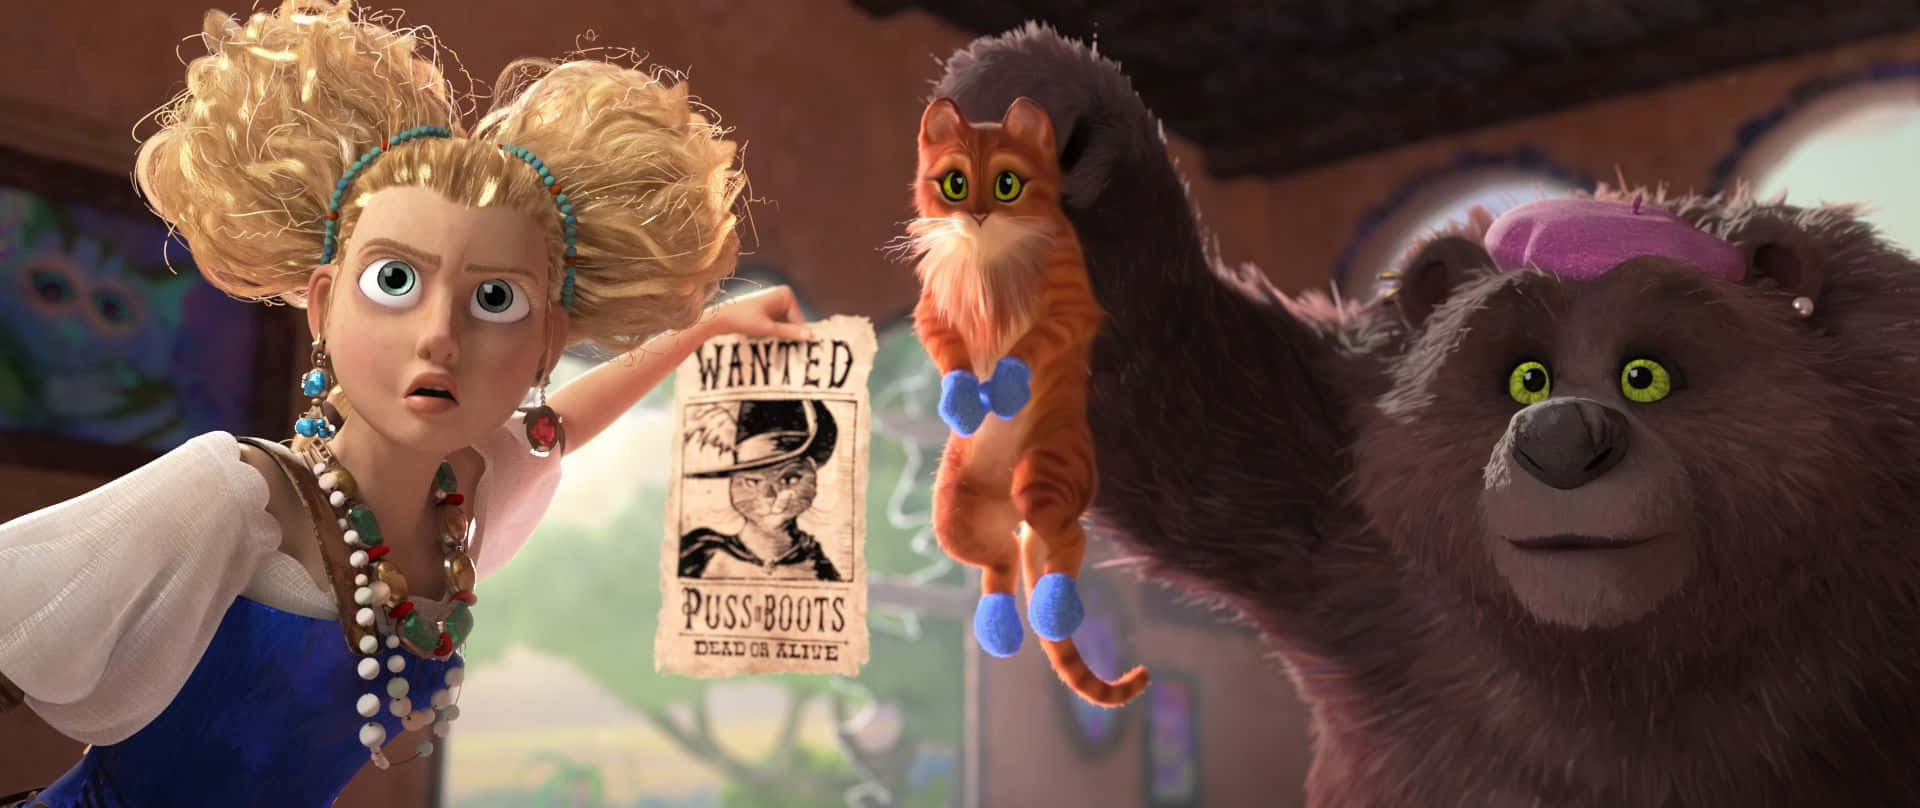 Puss In Boots Wanted Poster Reveal Wallpaper